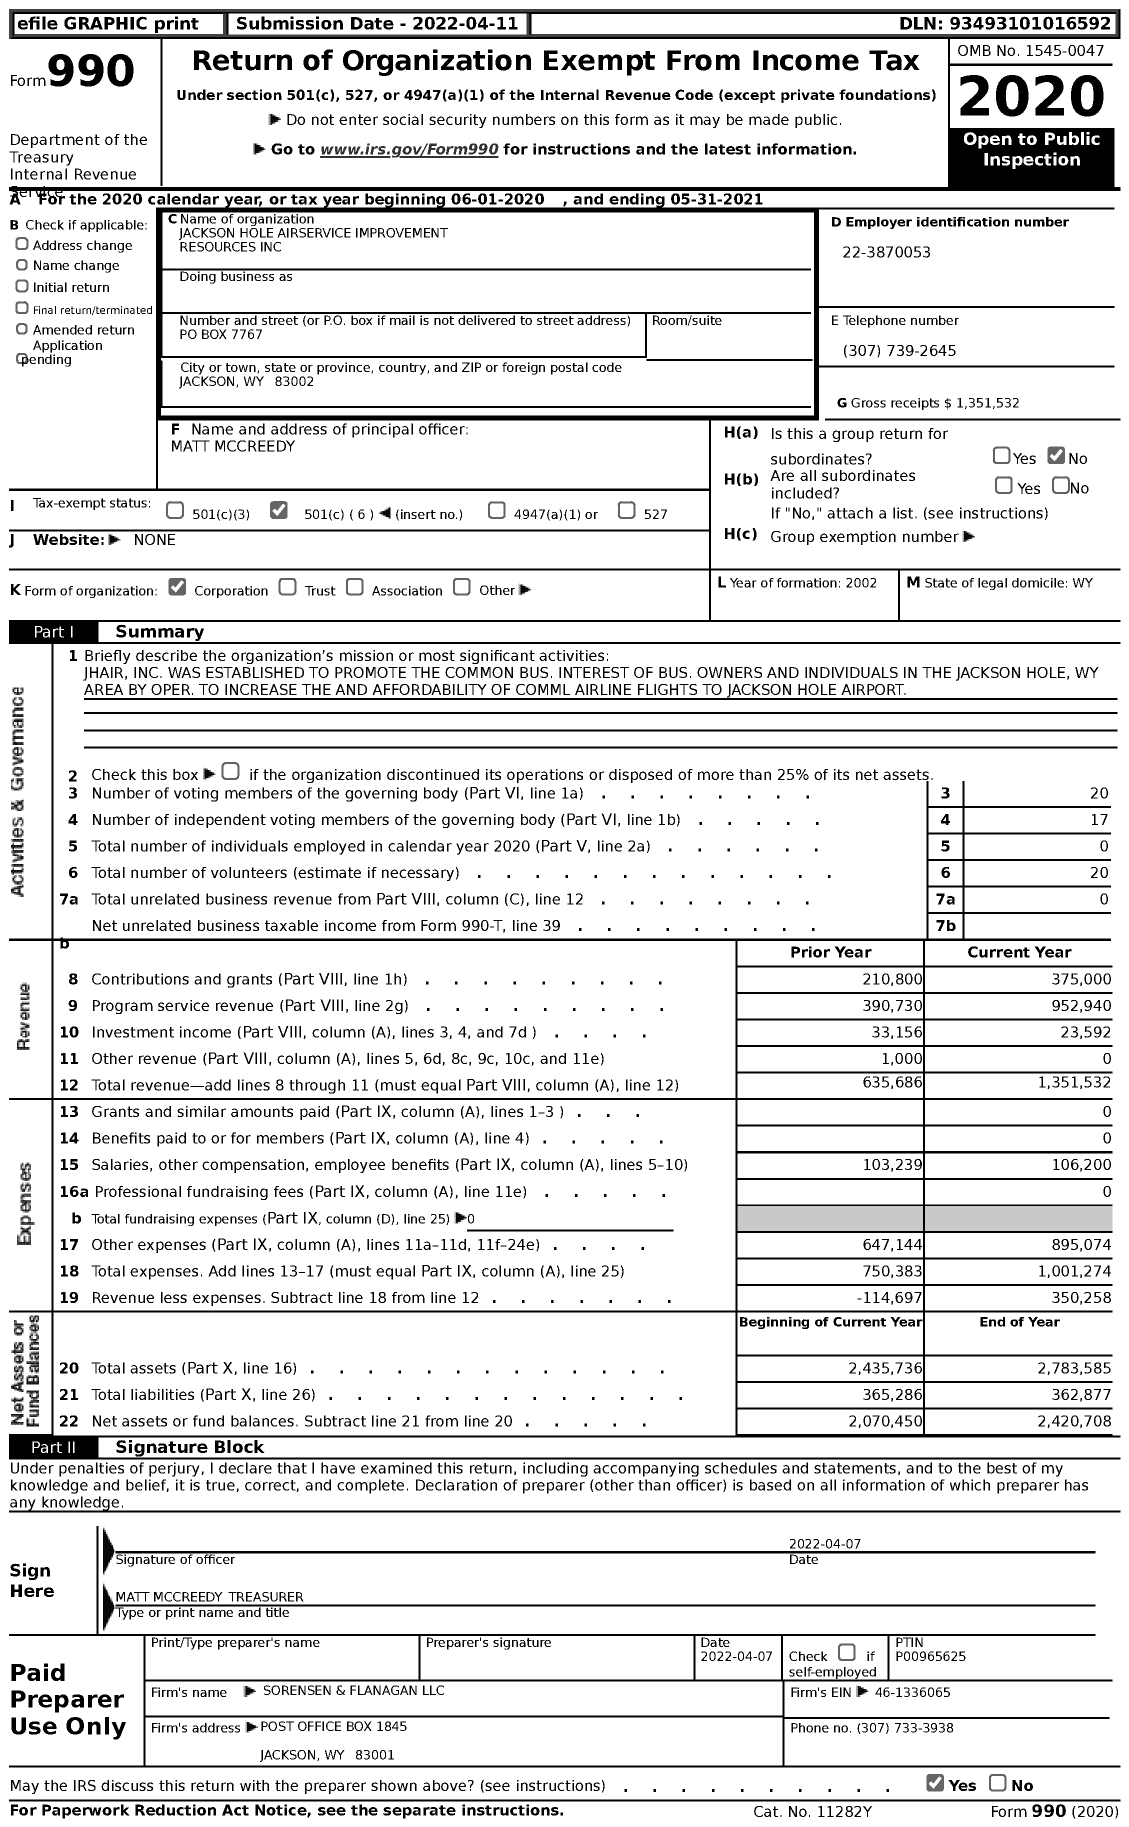 Image of first page of 2020 Form 990 for Jackson Hole Airservice Improvement Resources (JH AIR)